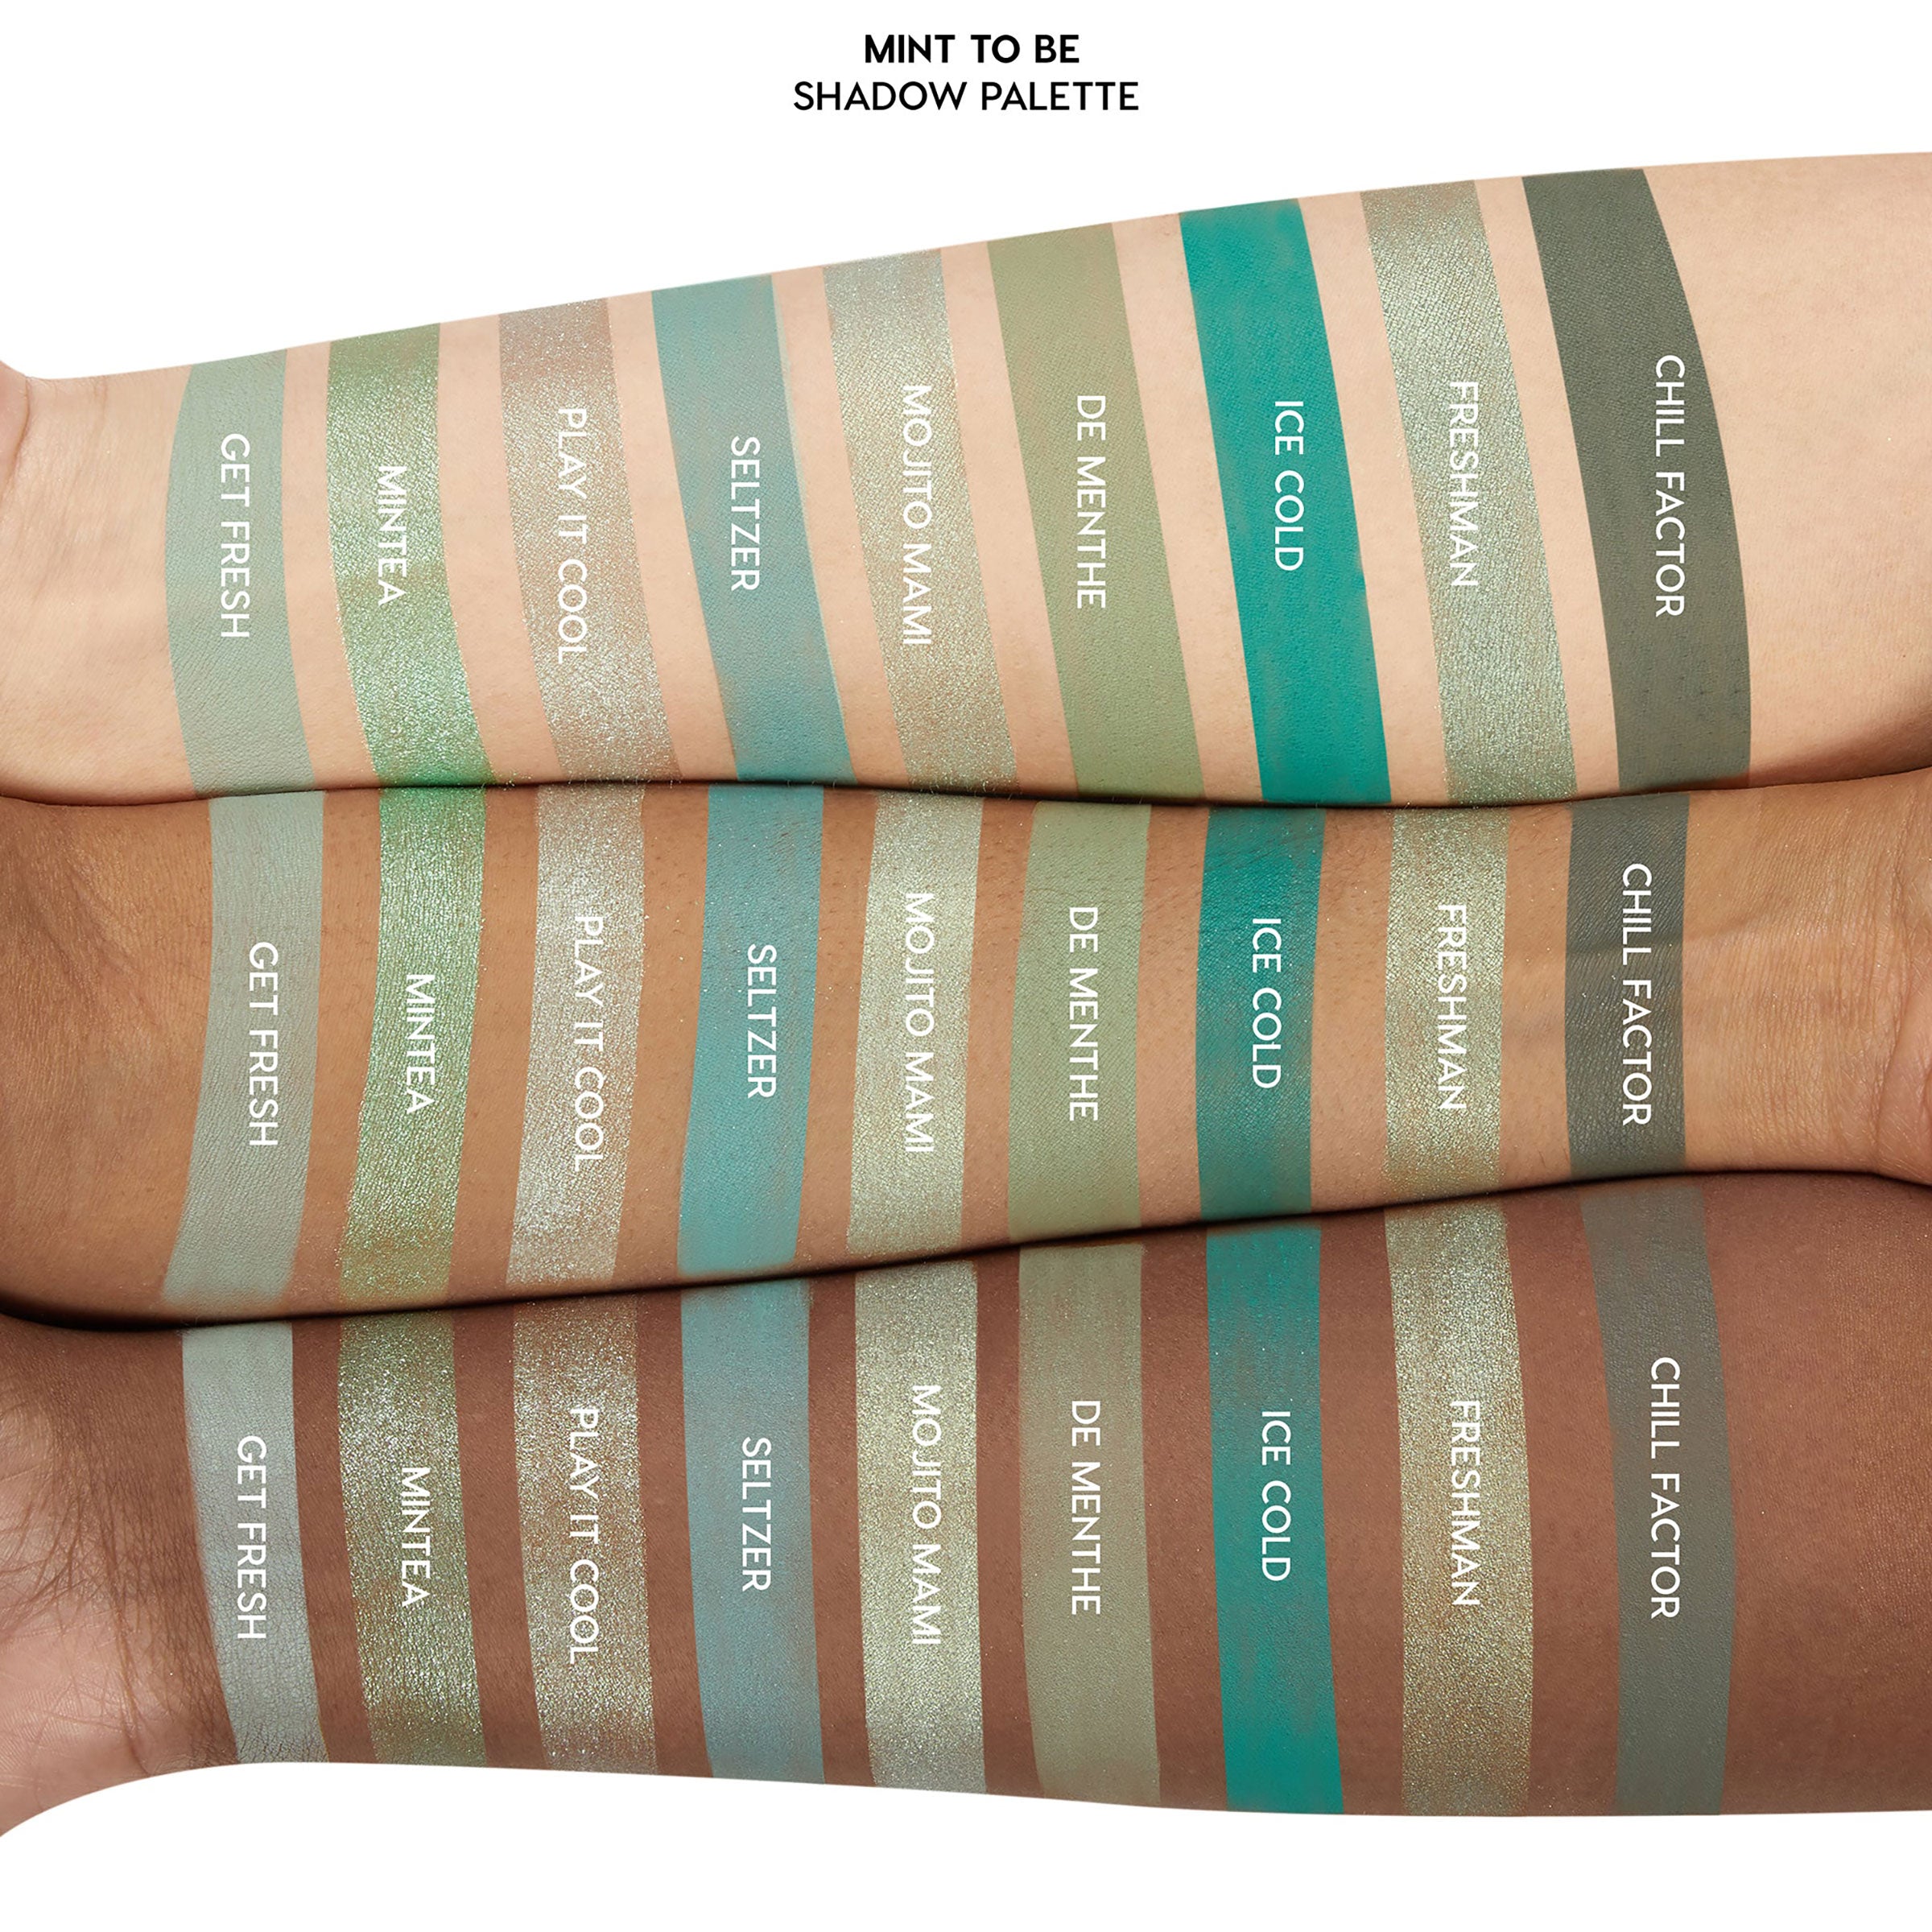 ColourPop Mint To Be Eyeshadow Palette including 9 minty blendable shades in mattes and bold metallics for a soft wash to a vibrant dramatic look Arm Swatches